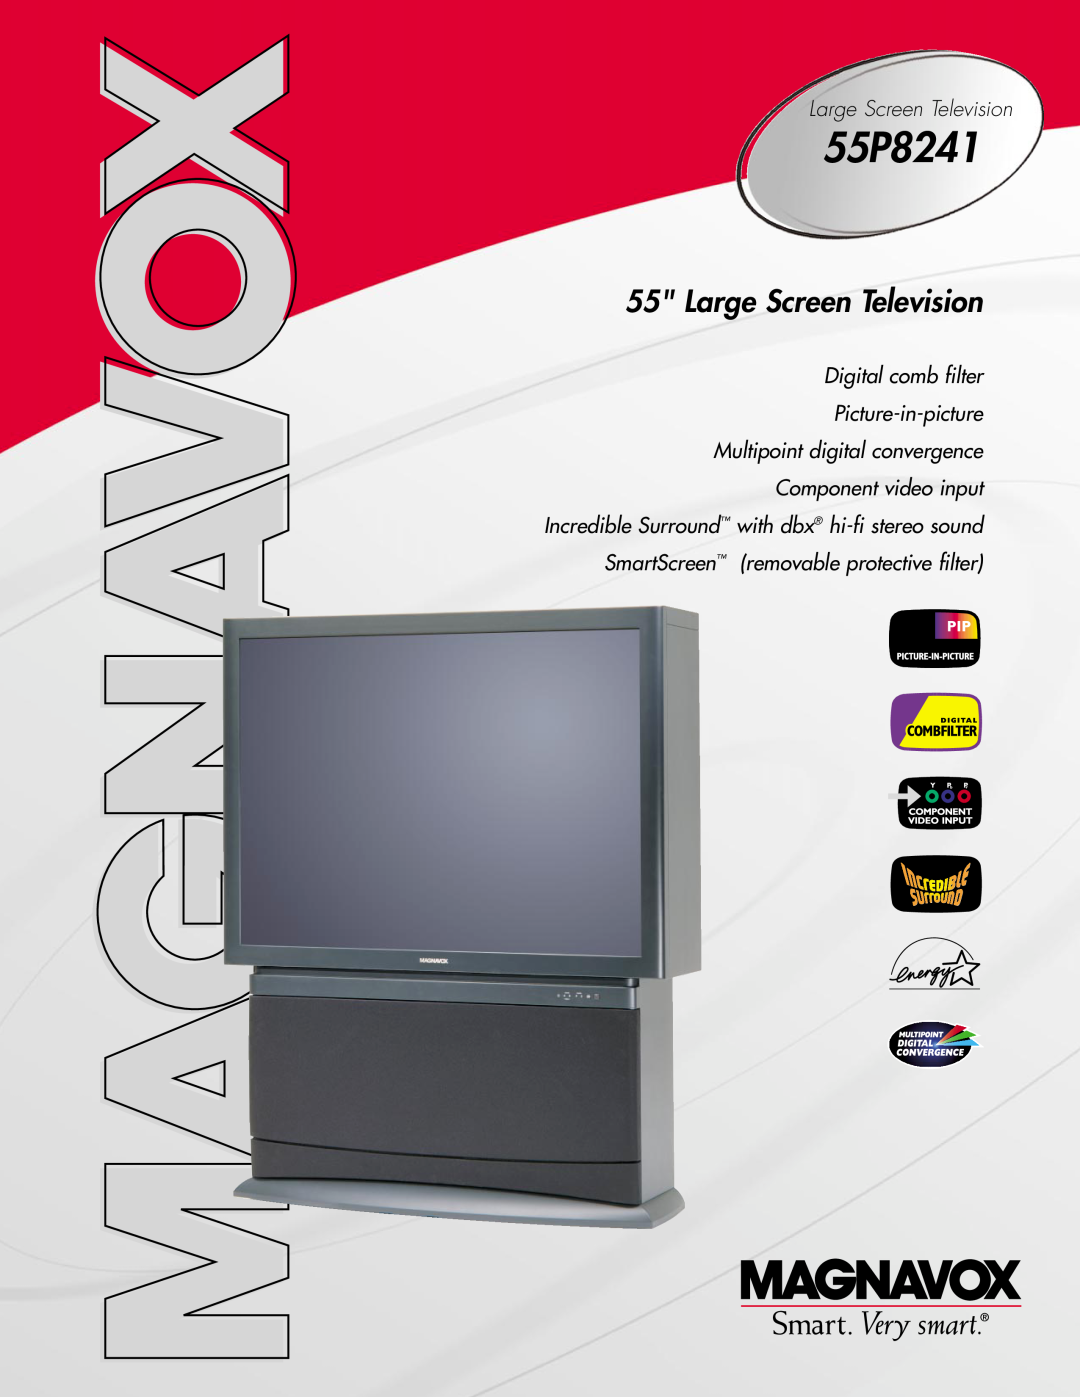 Magnavox 55P8241 manual Large Screen Television, Digital comb filter Picture-in-picture Multipoint digital convergence 